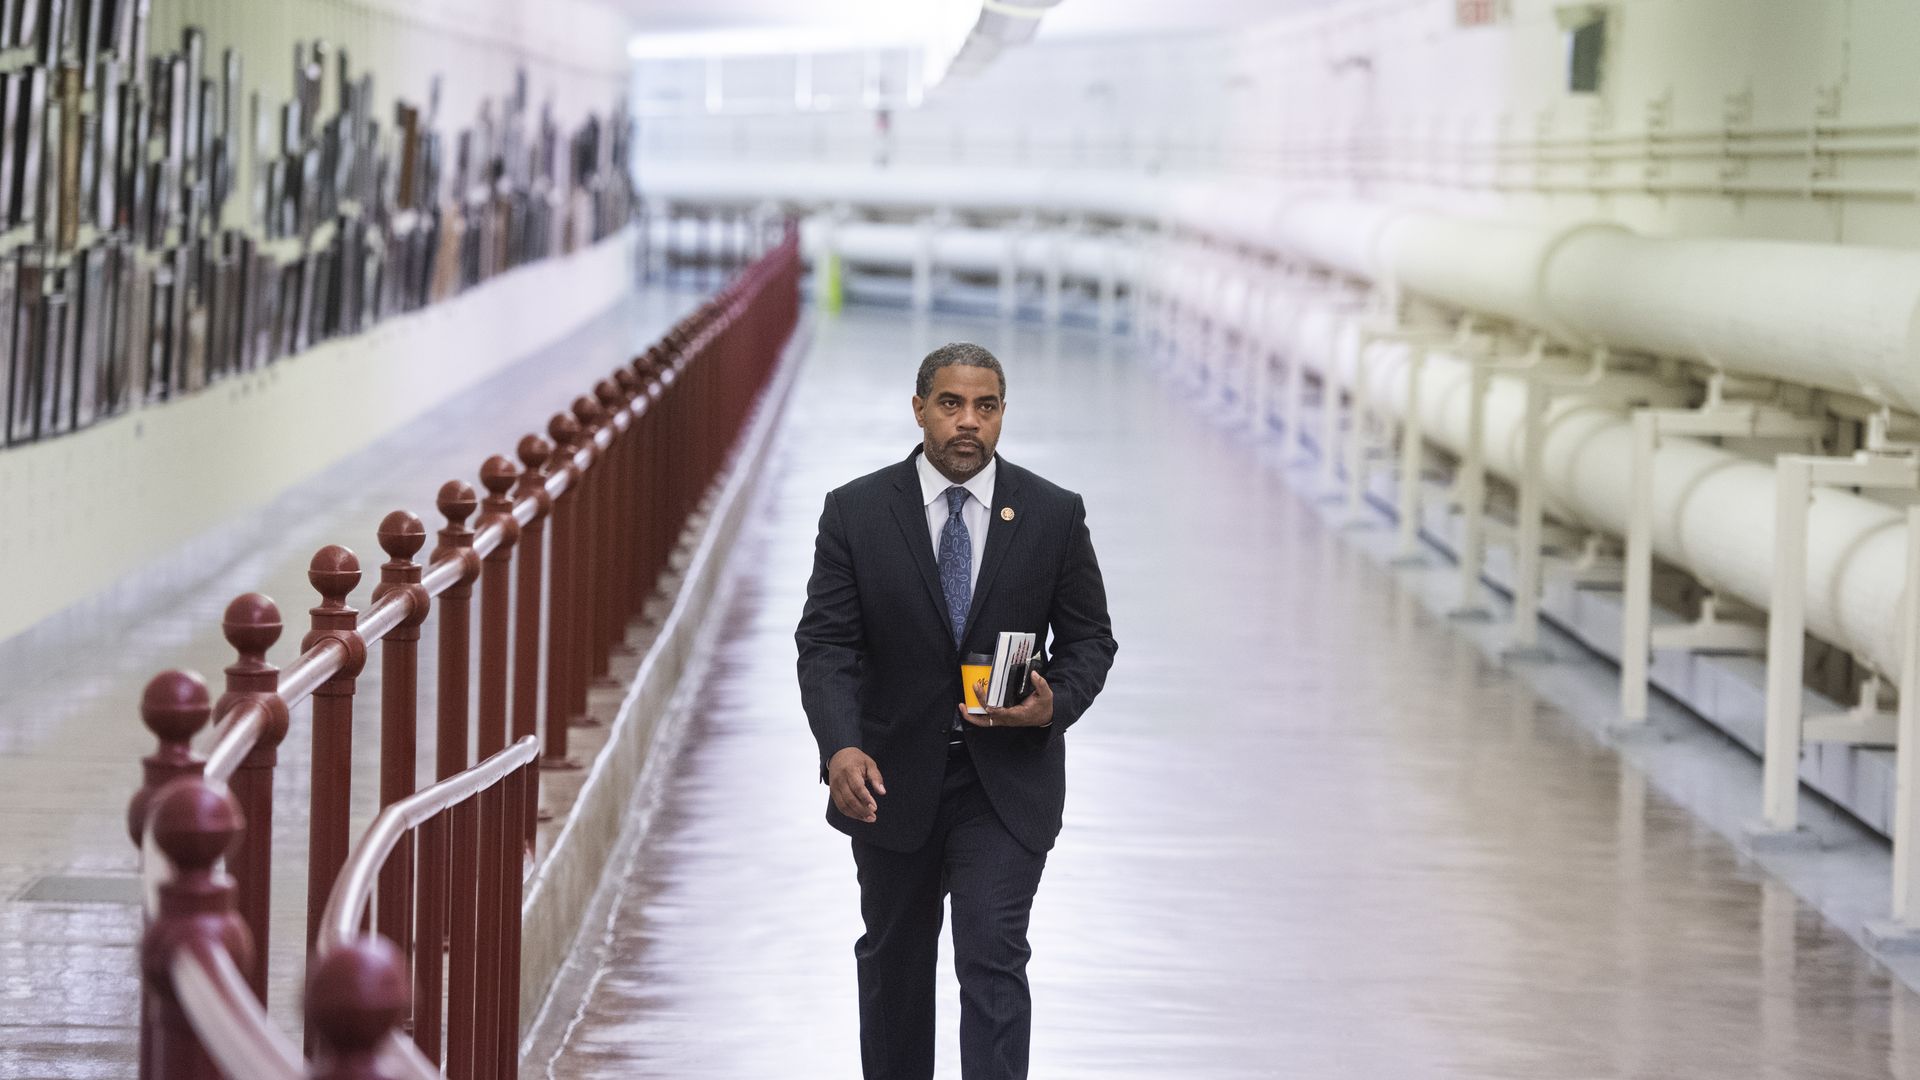 Rep. Steven Horsford is seen walking through a tunnel between the Capitol and congressional office buildings.